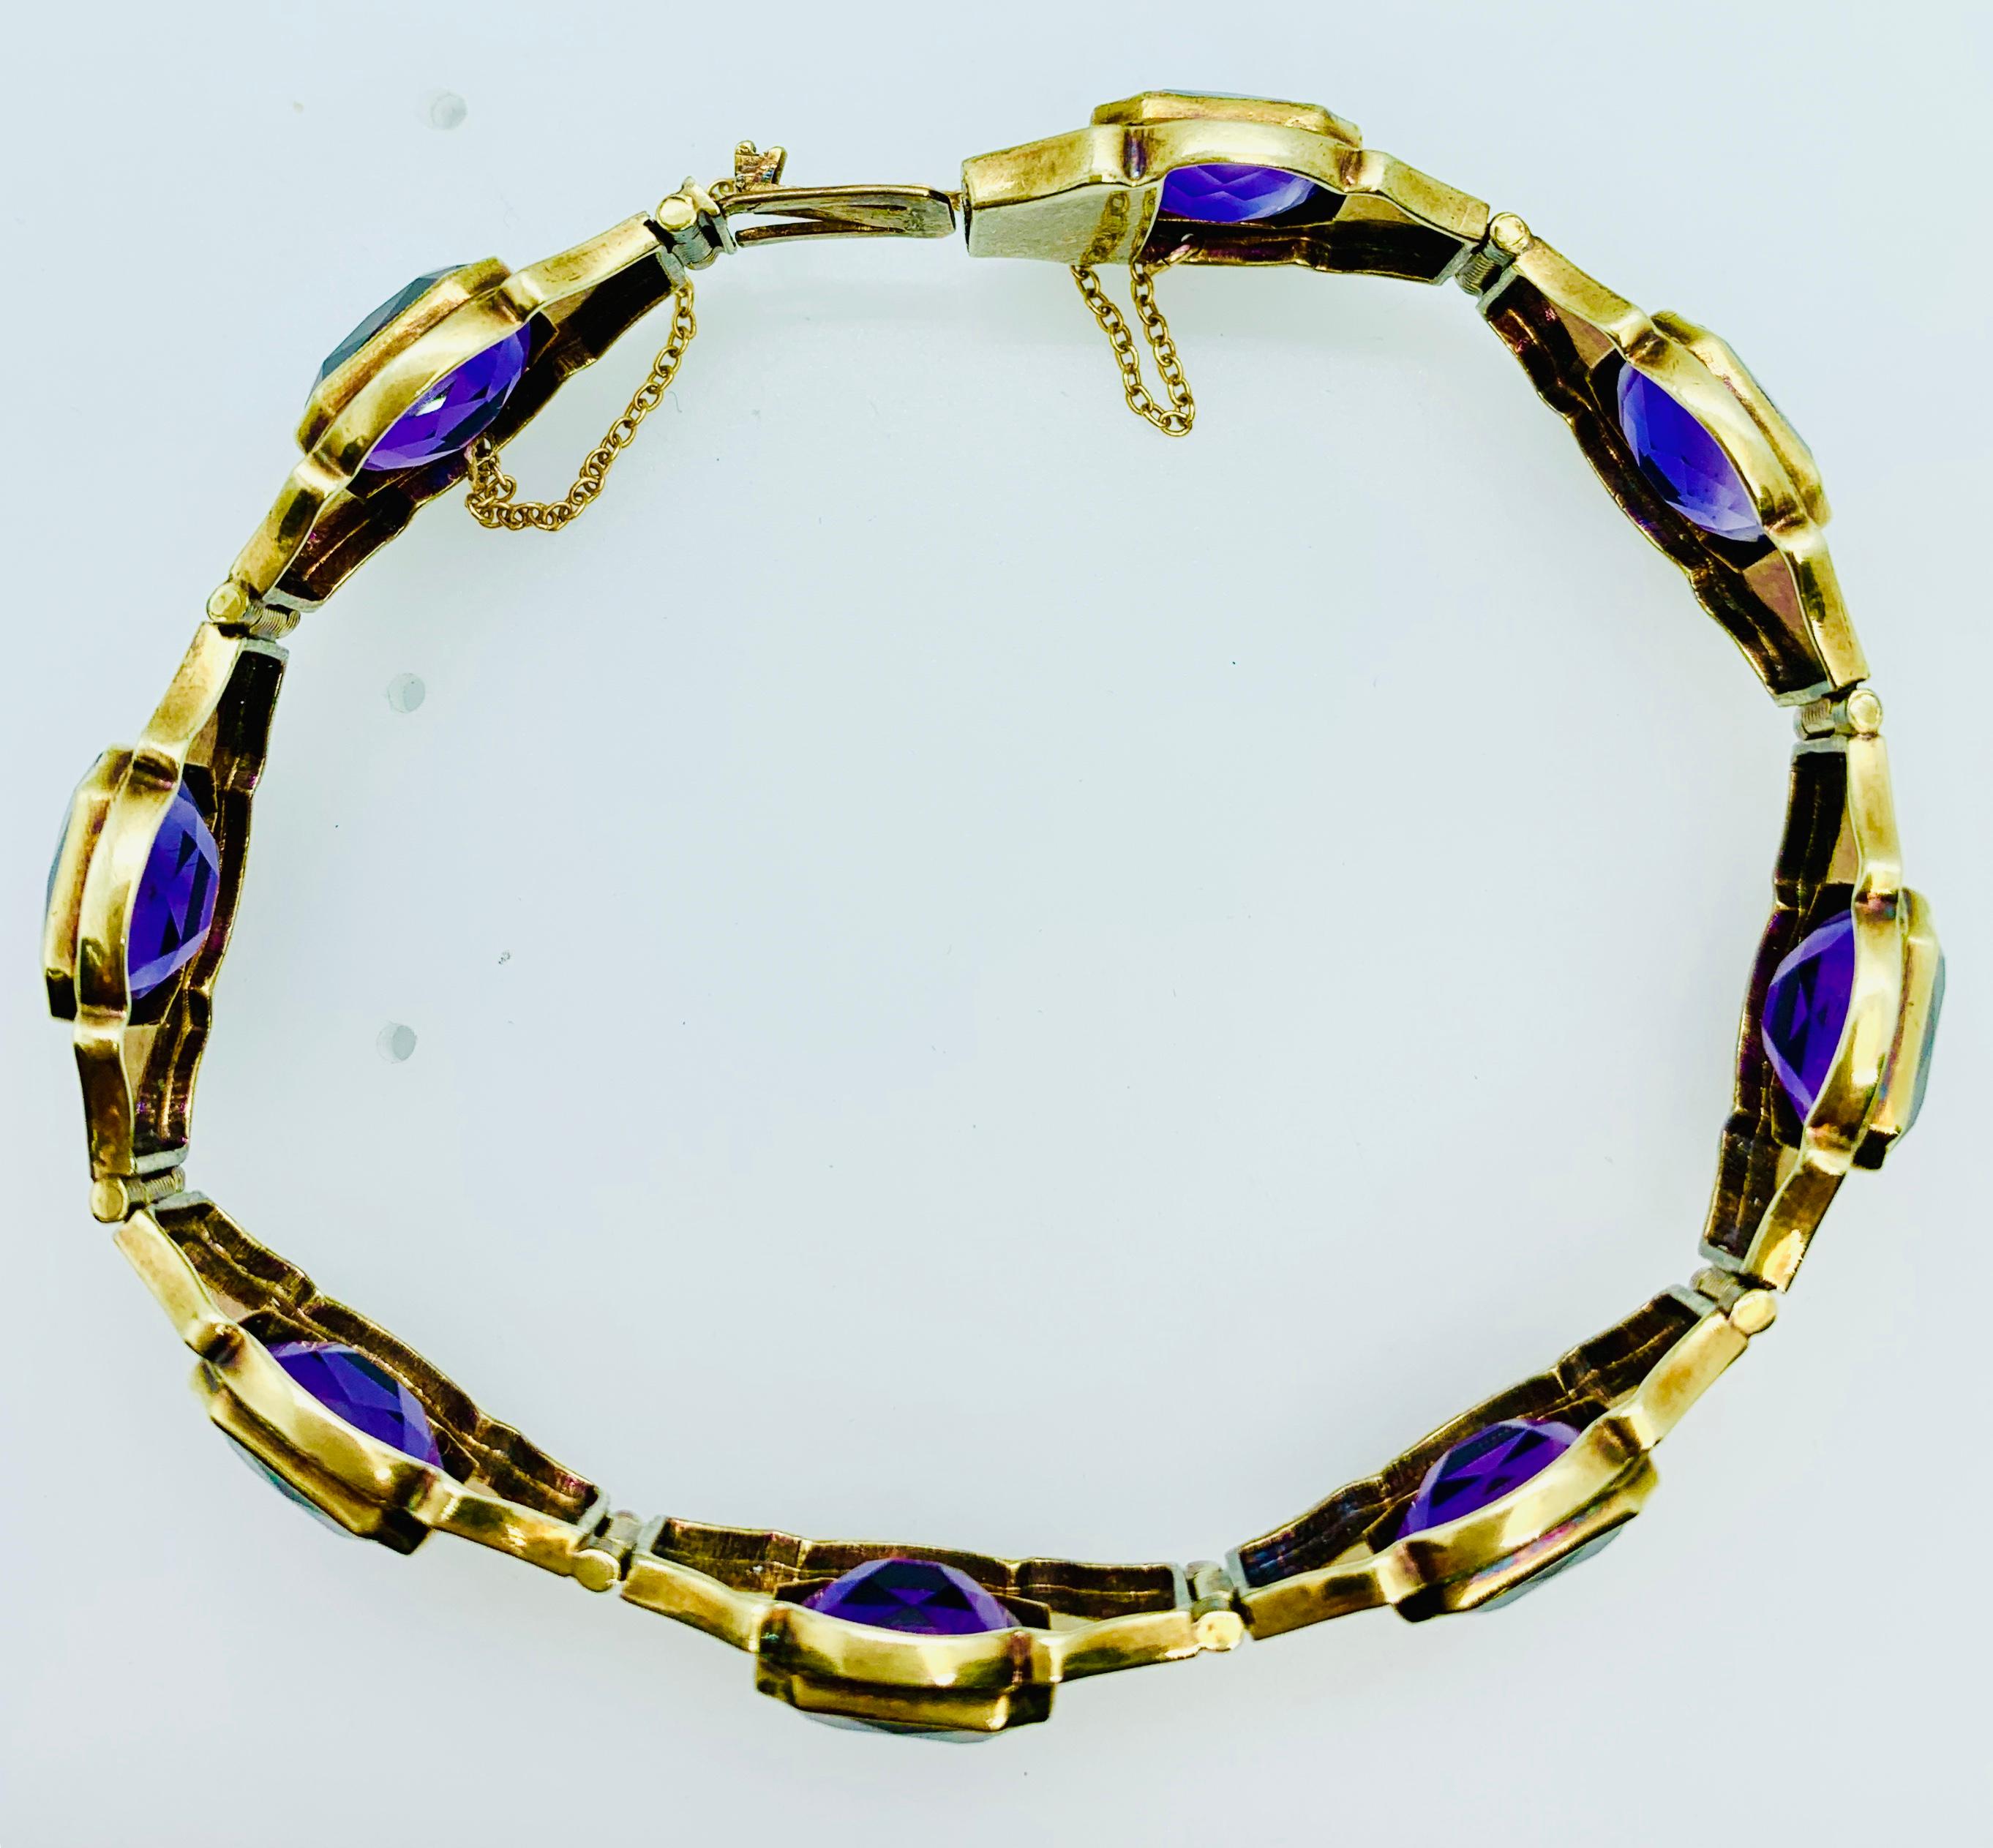 This gorgeous art deco bracelet features 8 sections that have beautiful and brilliant  cushion shaped amethyst stones at the center that are flanked by two green enamel strips on top and bottom and then black enamel and gold scroll work on either